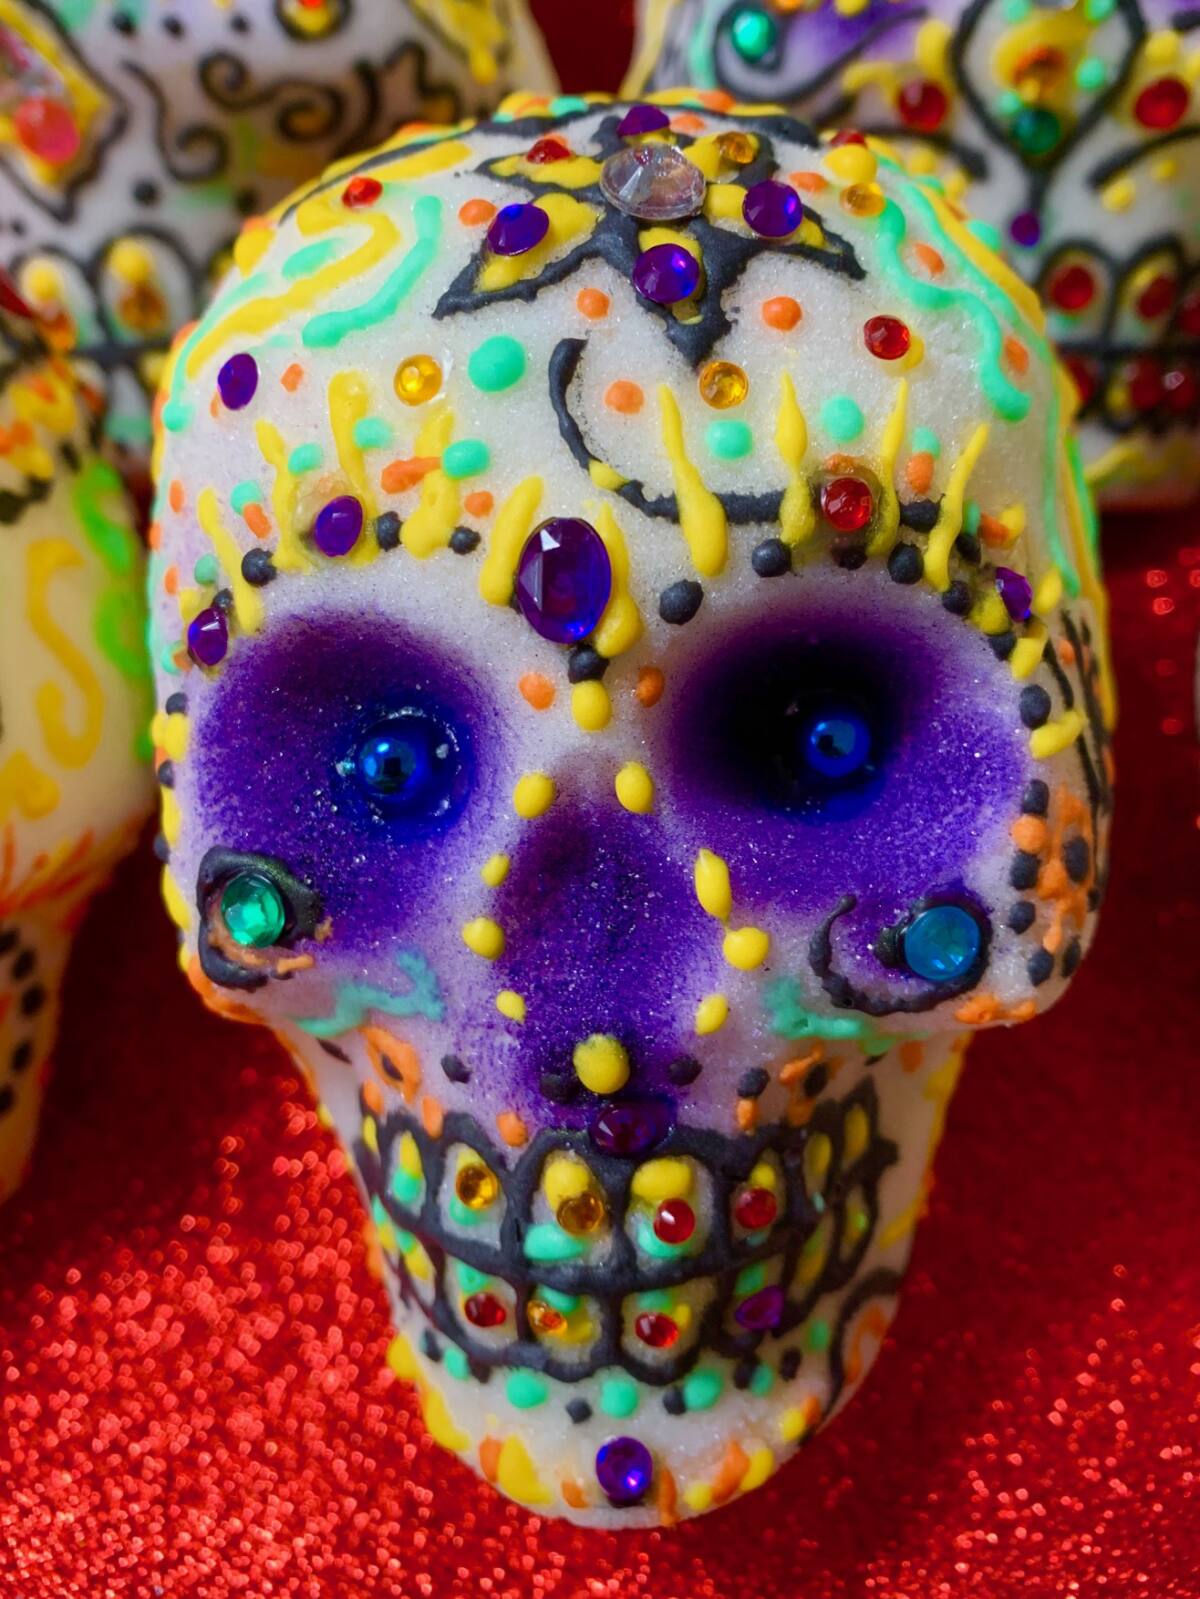 Sugar Skull: History and Meaning of Day of the Dead Skull